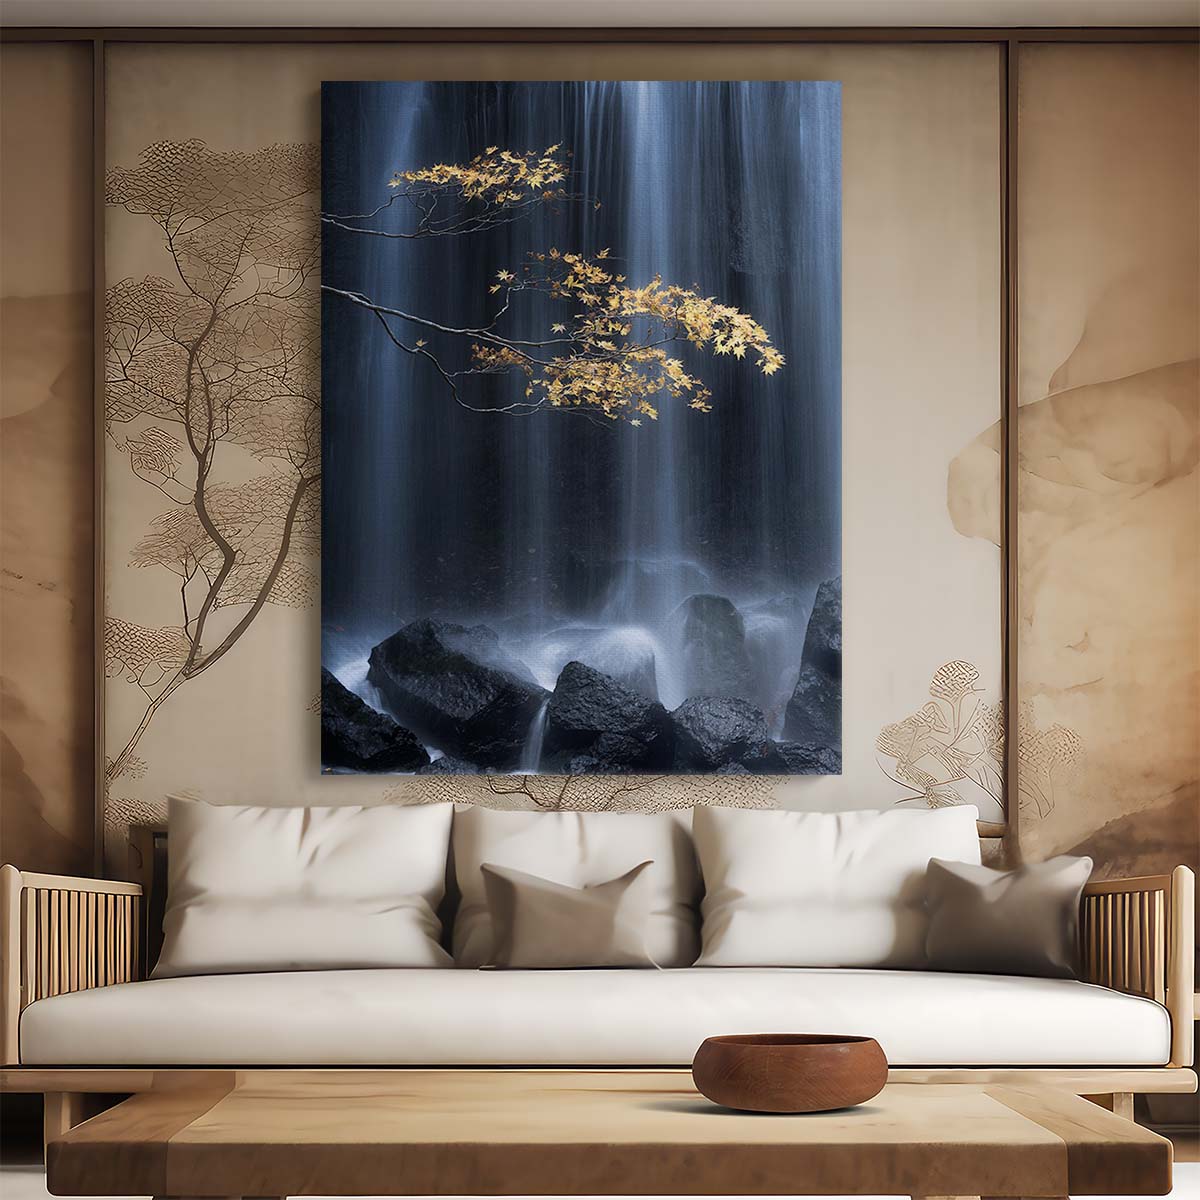 Tranquil Autumn Waterfall Landscape - Zen Meditation Photography Art by Luxuriance Designs, made in USA